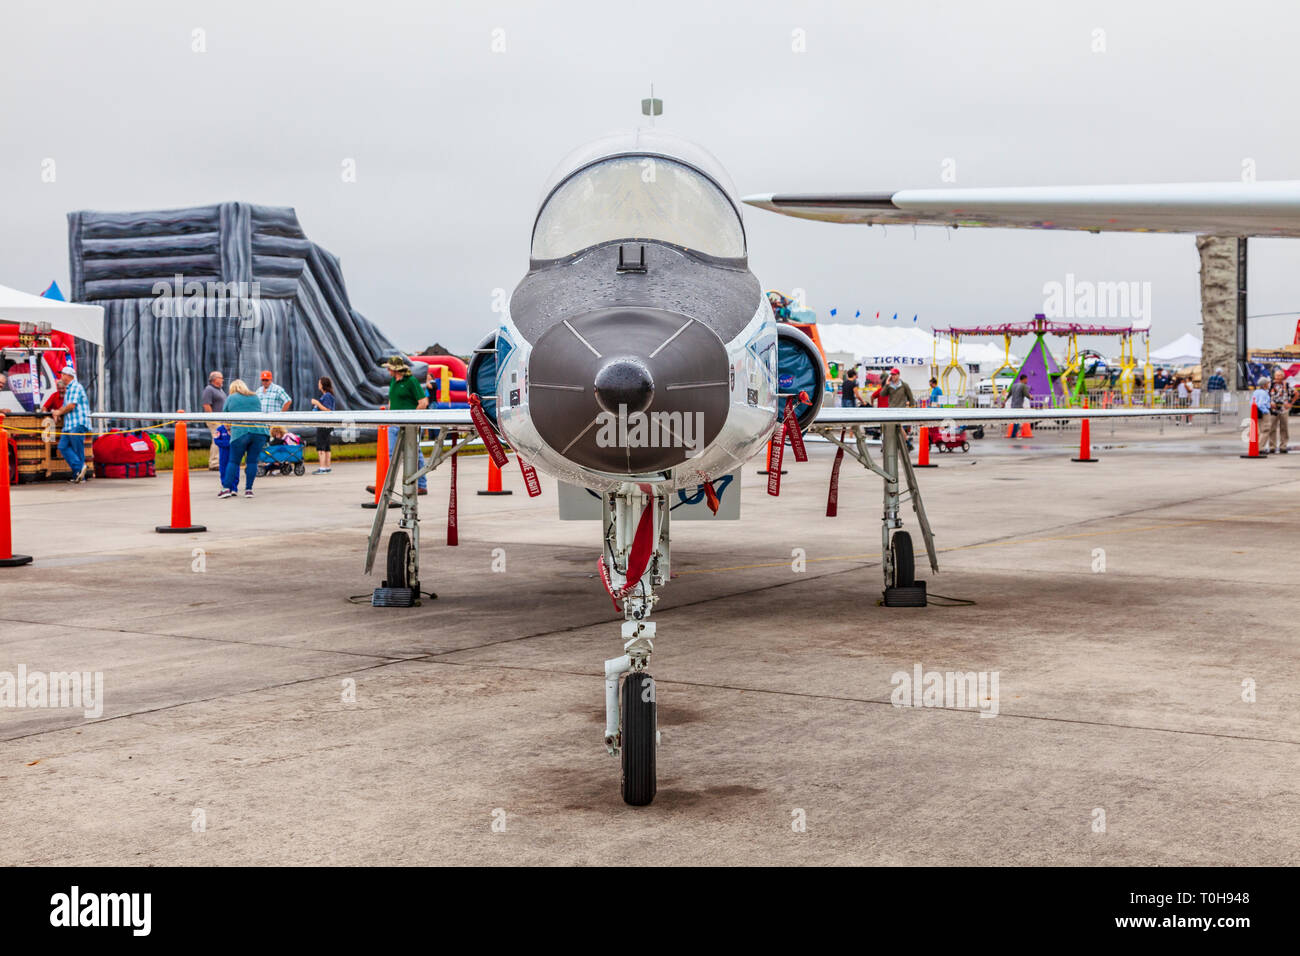 NASA T-38 Talon aircraft at 2018 Wings over Houston Air Show in Houston, Texas. Featured items included Blue Angels and other aviation programs. Stock Photo